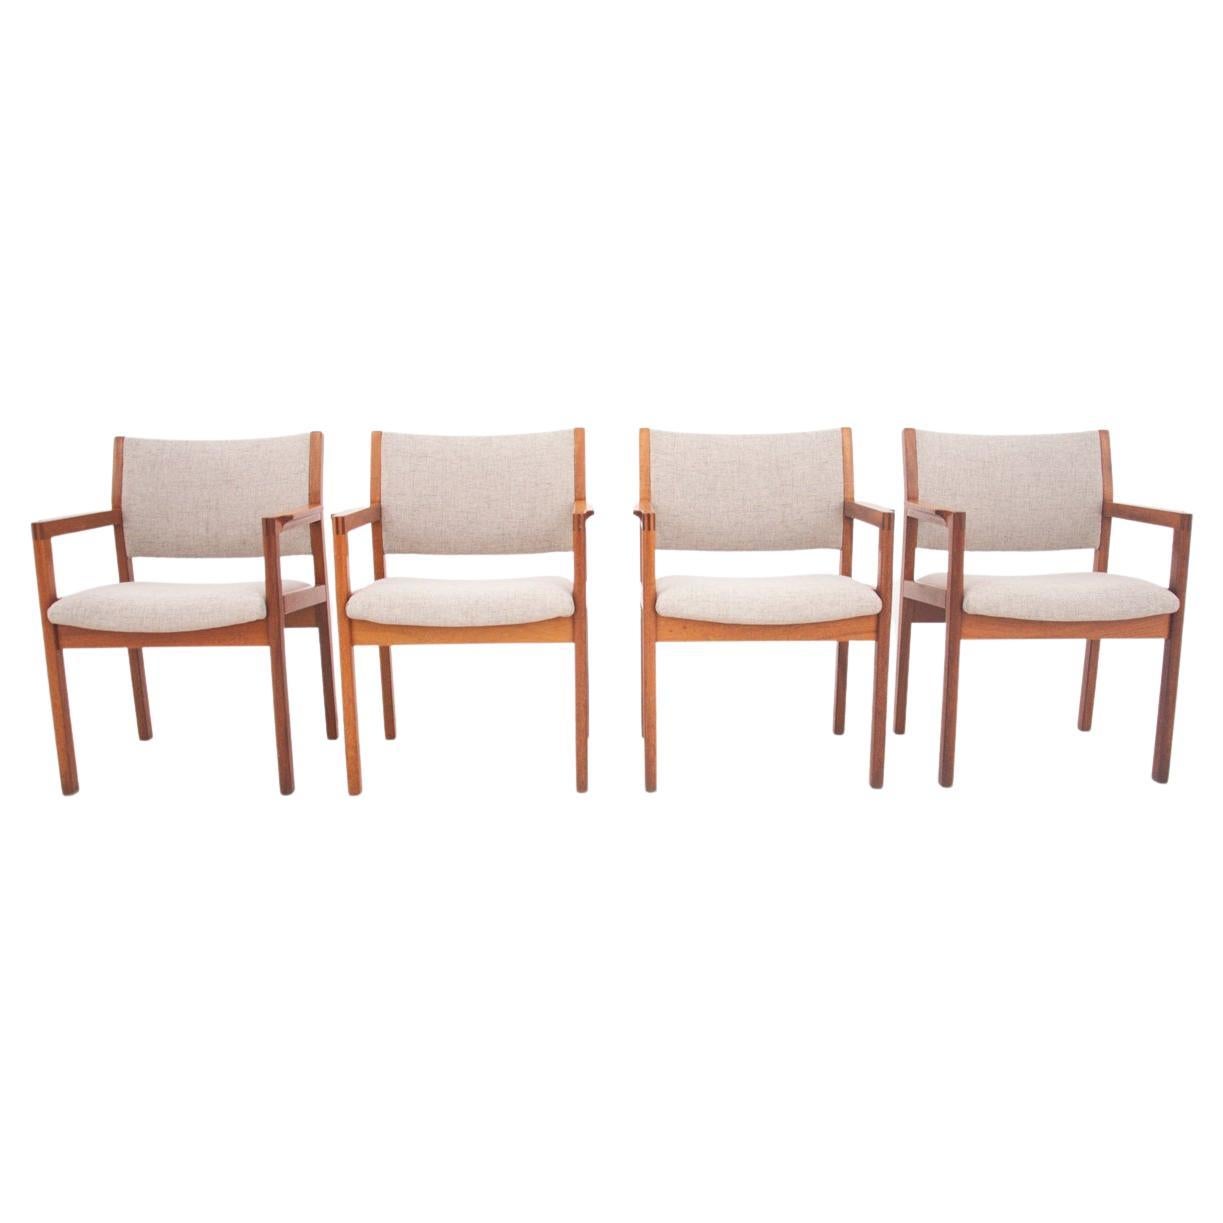 Danish Dining Chairs, 1960s, Set of 4